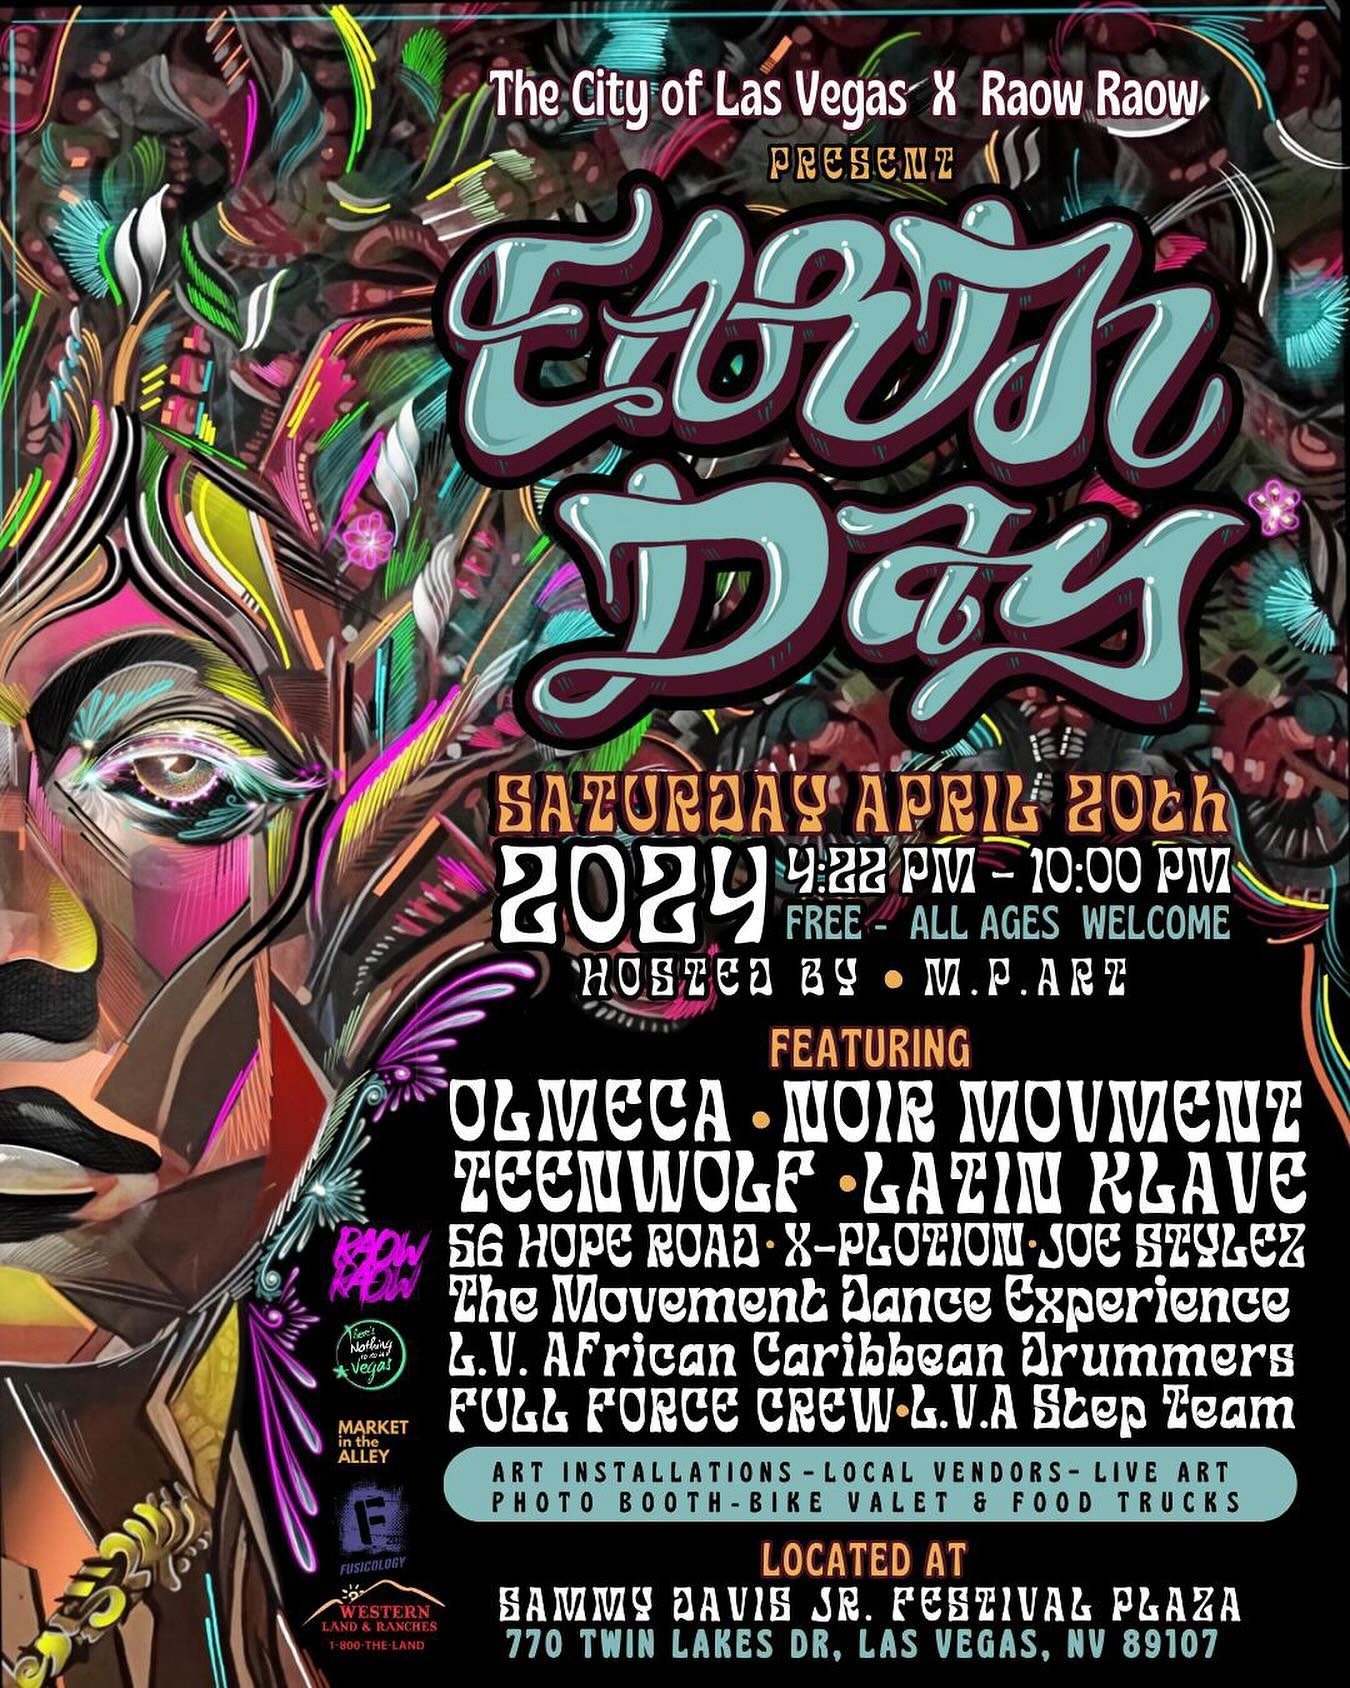 🌎✨ We are excited to join @itsraowraow in partnership with @cityoflasvegas, as we invite you to the 3rd Annual Earth Day Festival.  It&rsquo;s all happening at Sammy Davis Jr.Festival Plaza, located in Lorenzi Park. 🎉 Immerse yourself in the beauty